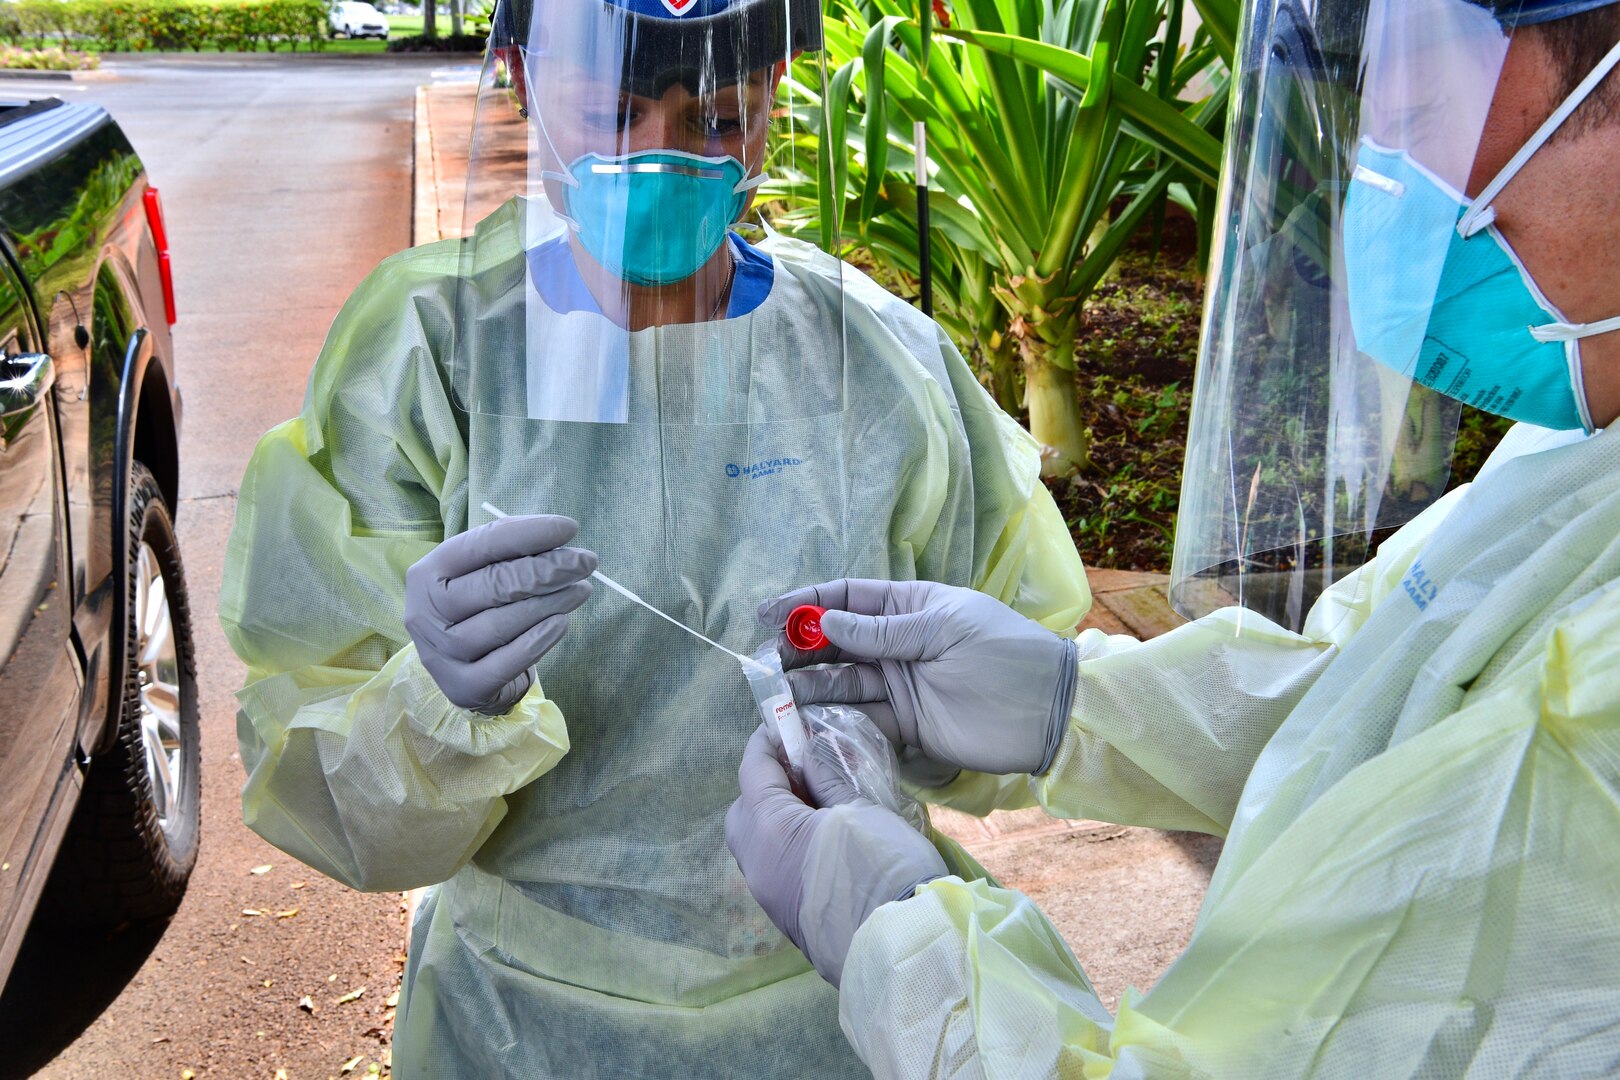 A person wearing personal protective equipment puts a swab into a vial being held by someone who is also wearing protective gear.